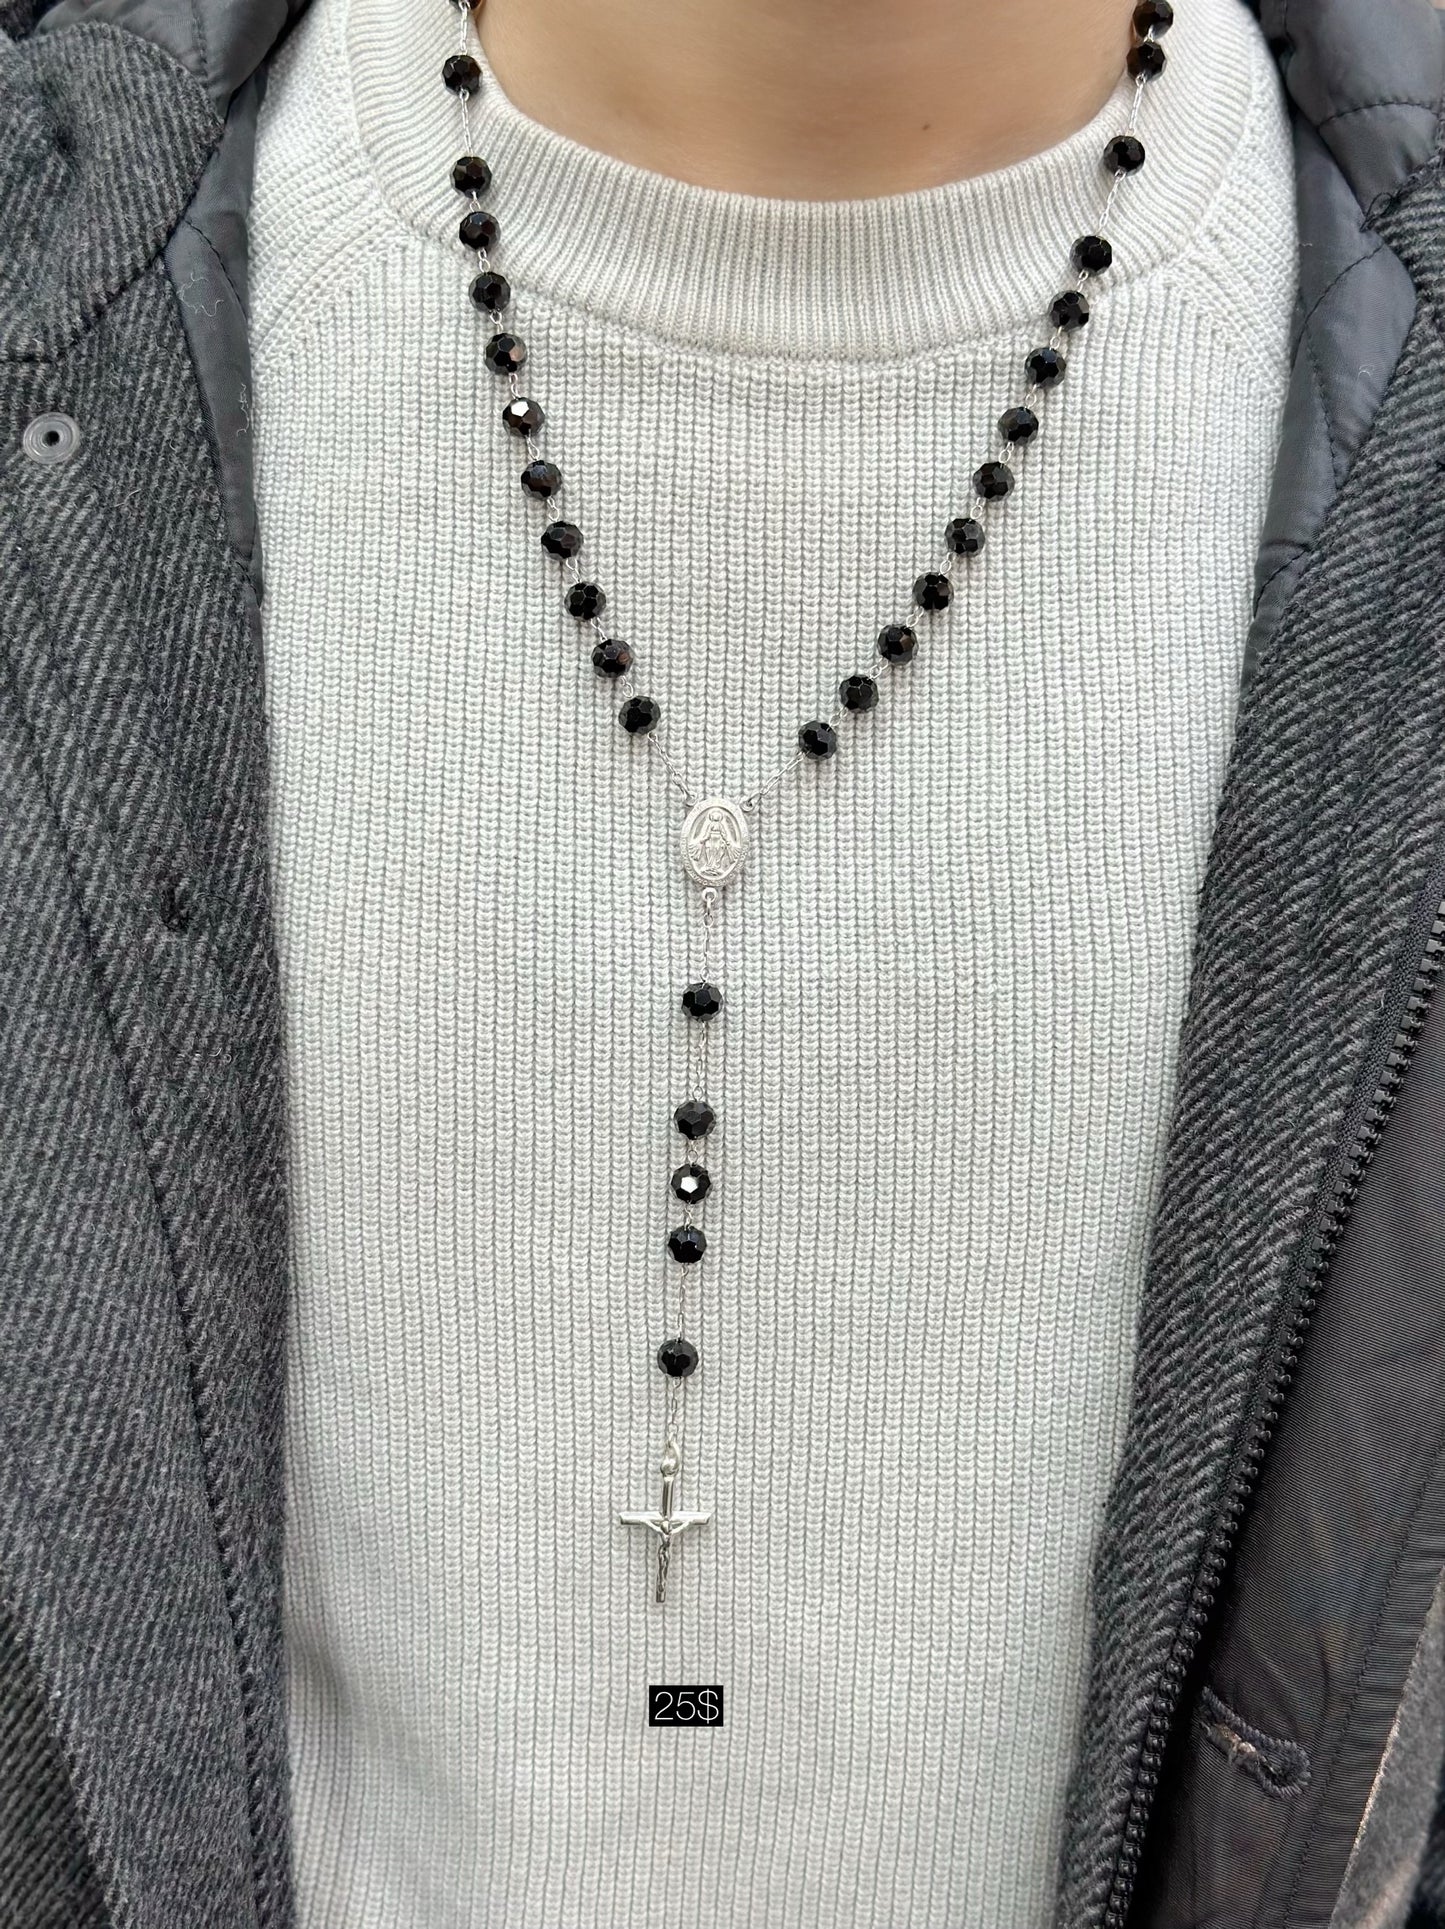 Rosary Necklace With Black Onyx Beads